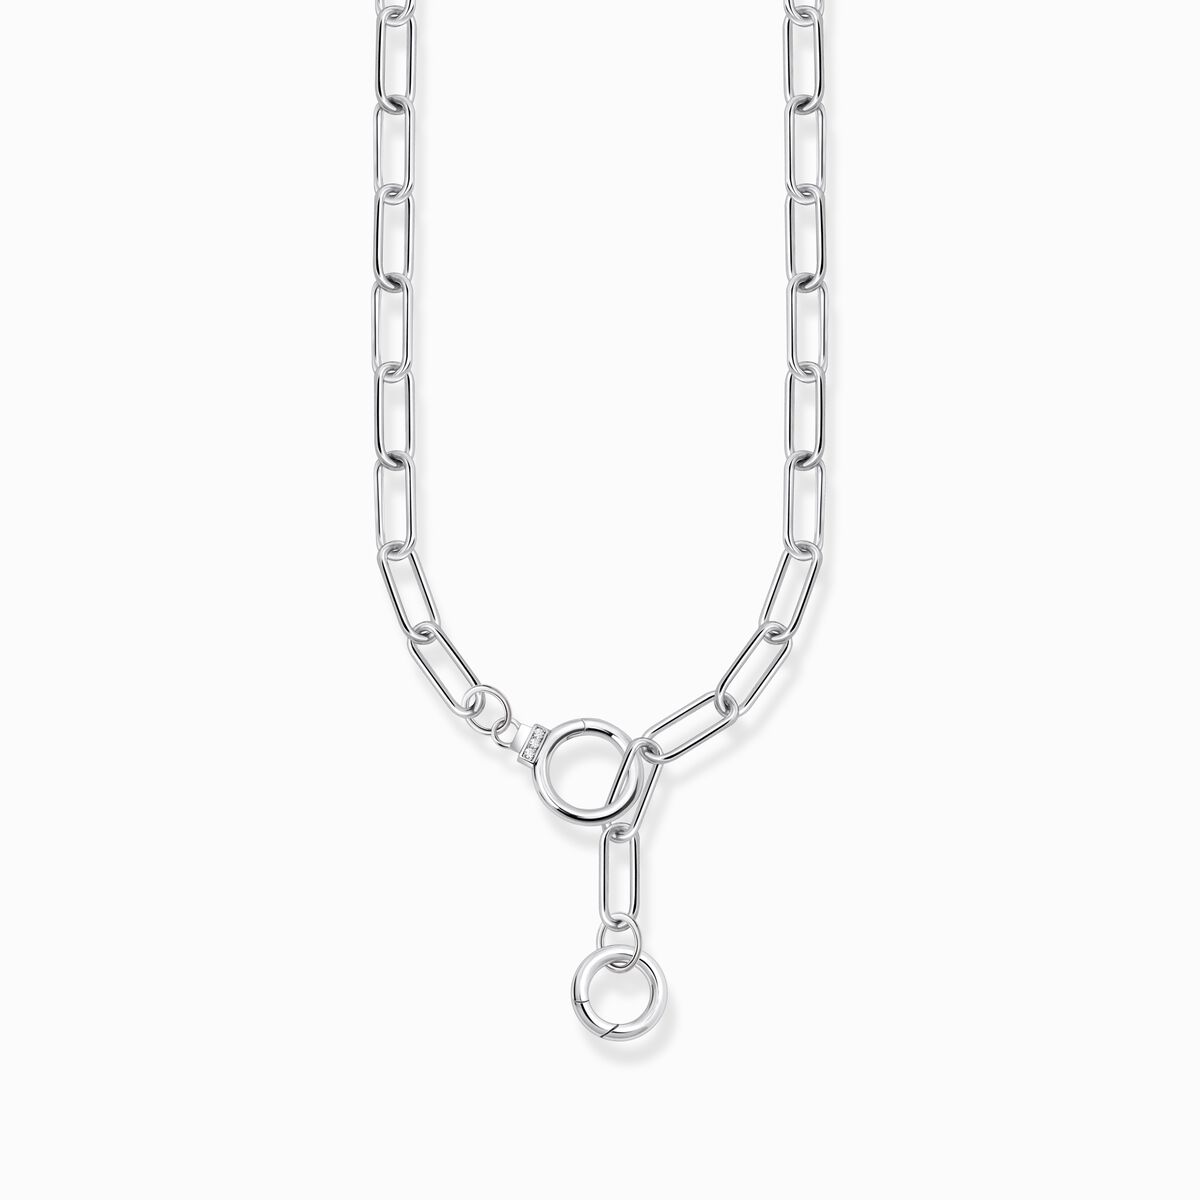 Silver link necklace with two ring clasps and white zirconia | THOMAS SABO